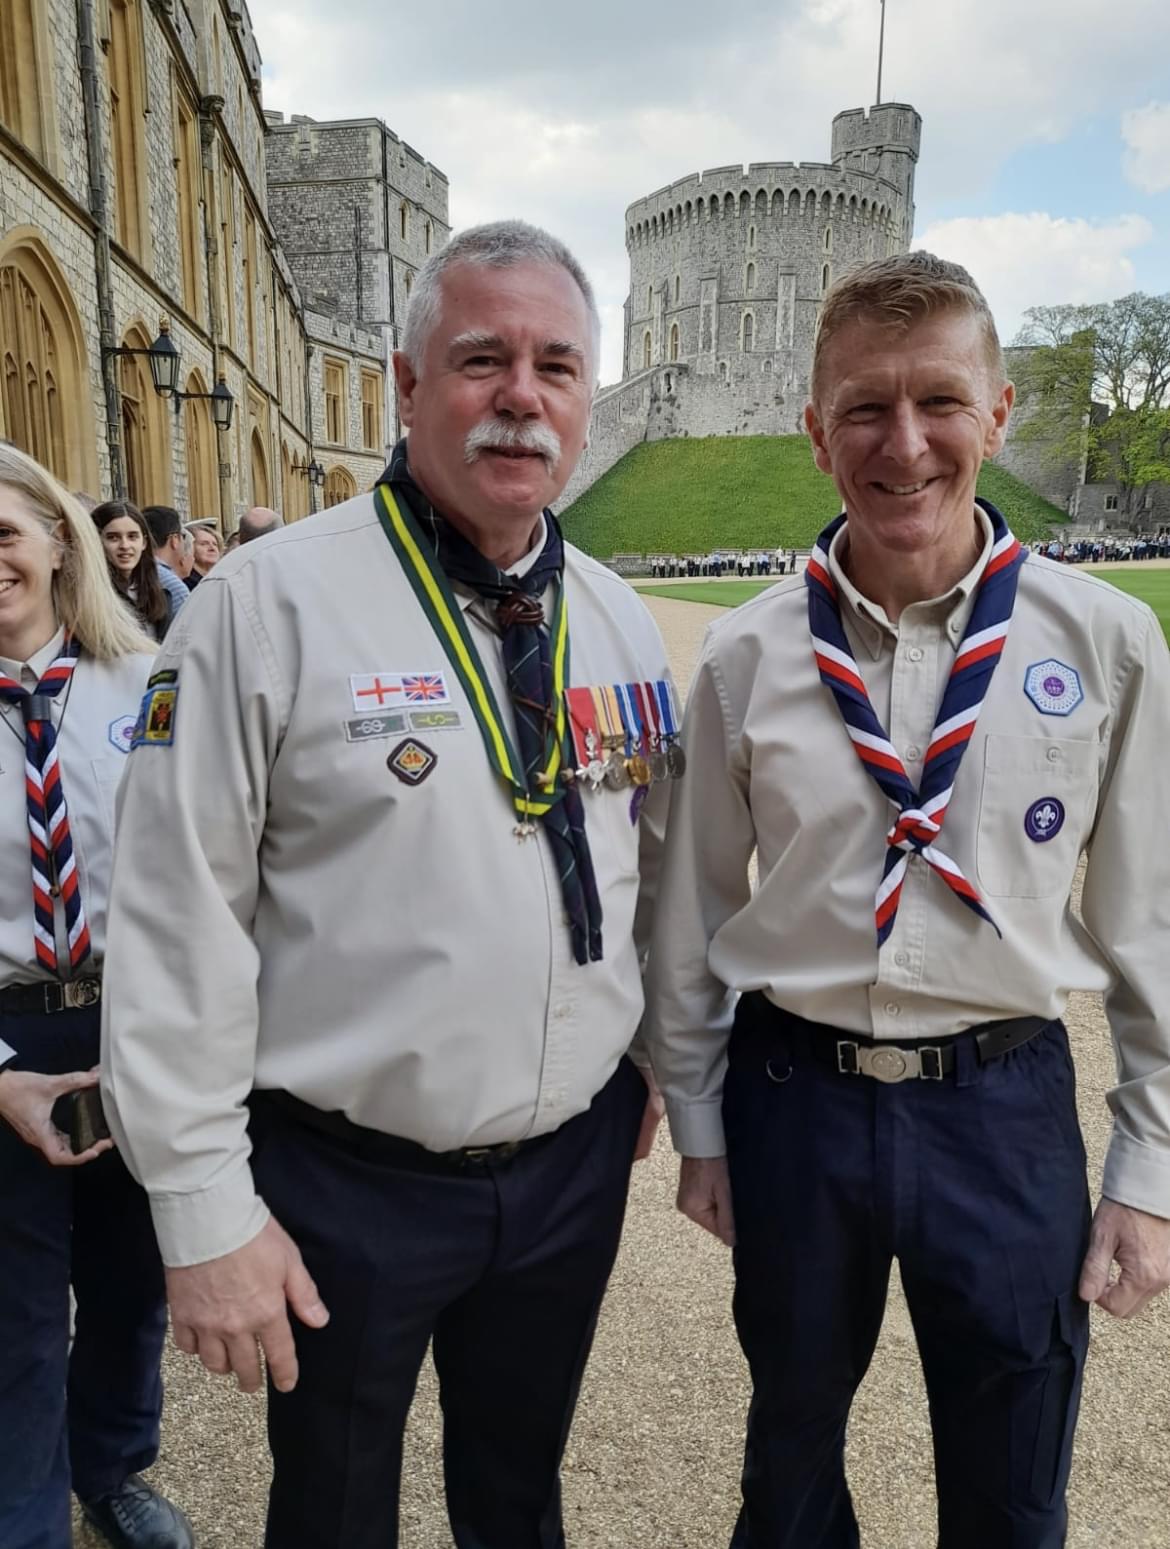 Steve is stood on the left next to Tim Peake, with Windsor castle behind them. They are both wearing Scouts uniform and their neckers. Steve's Queen Scout award, along with various other medals and badges, can be seen.